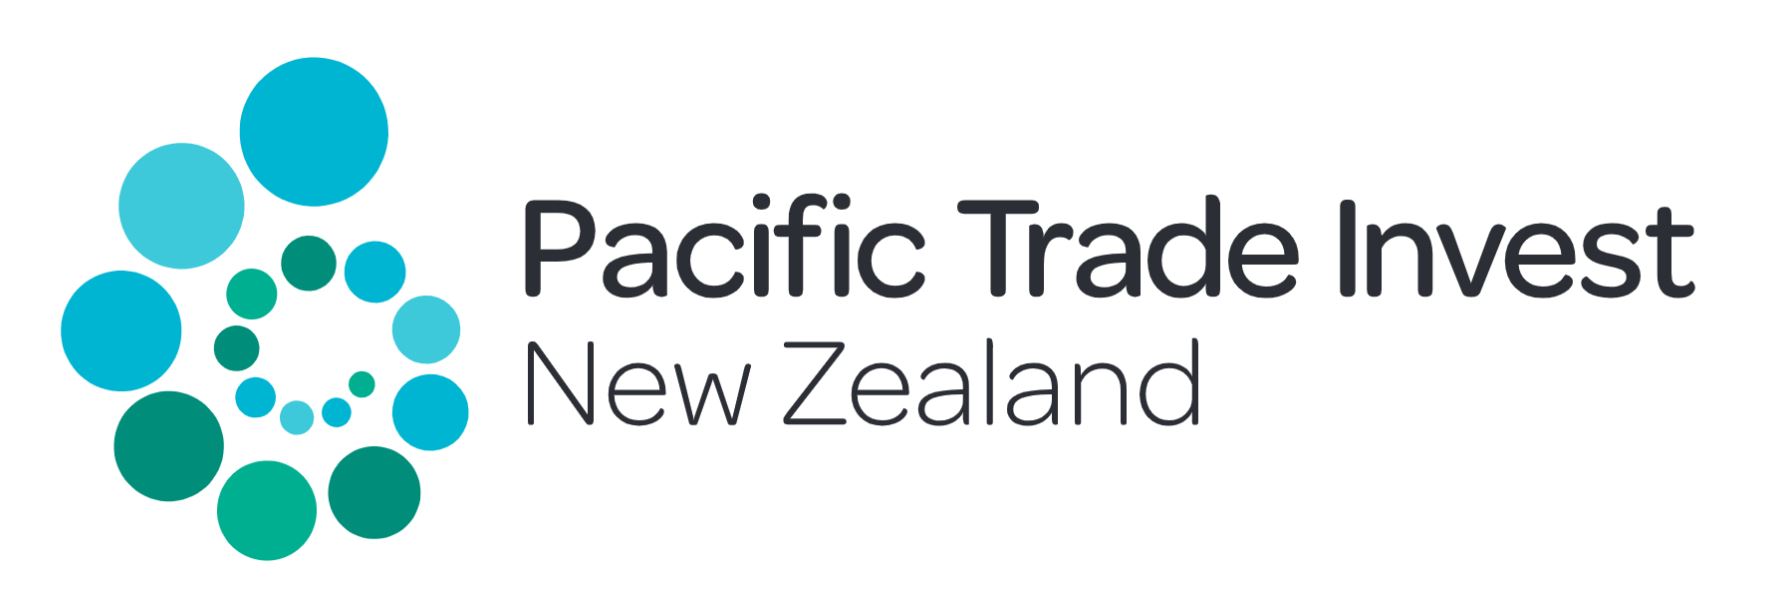 Pacific Trade Invest NZ 